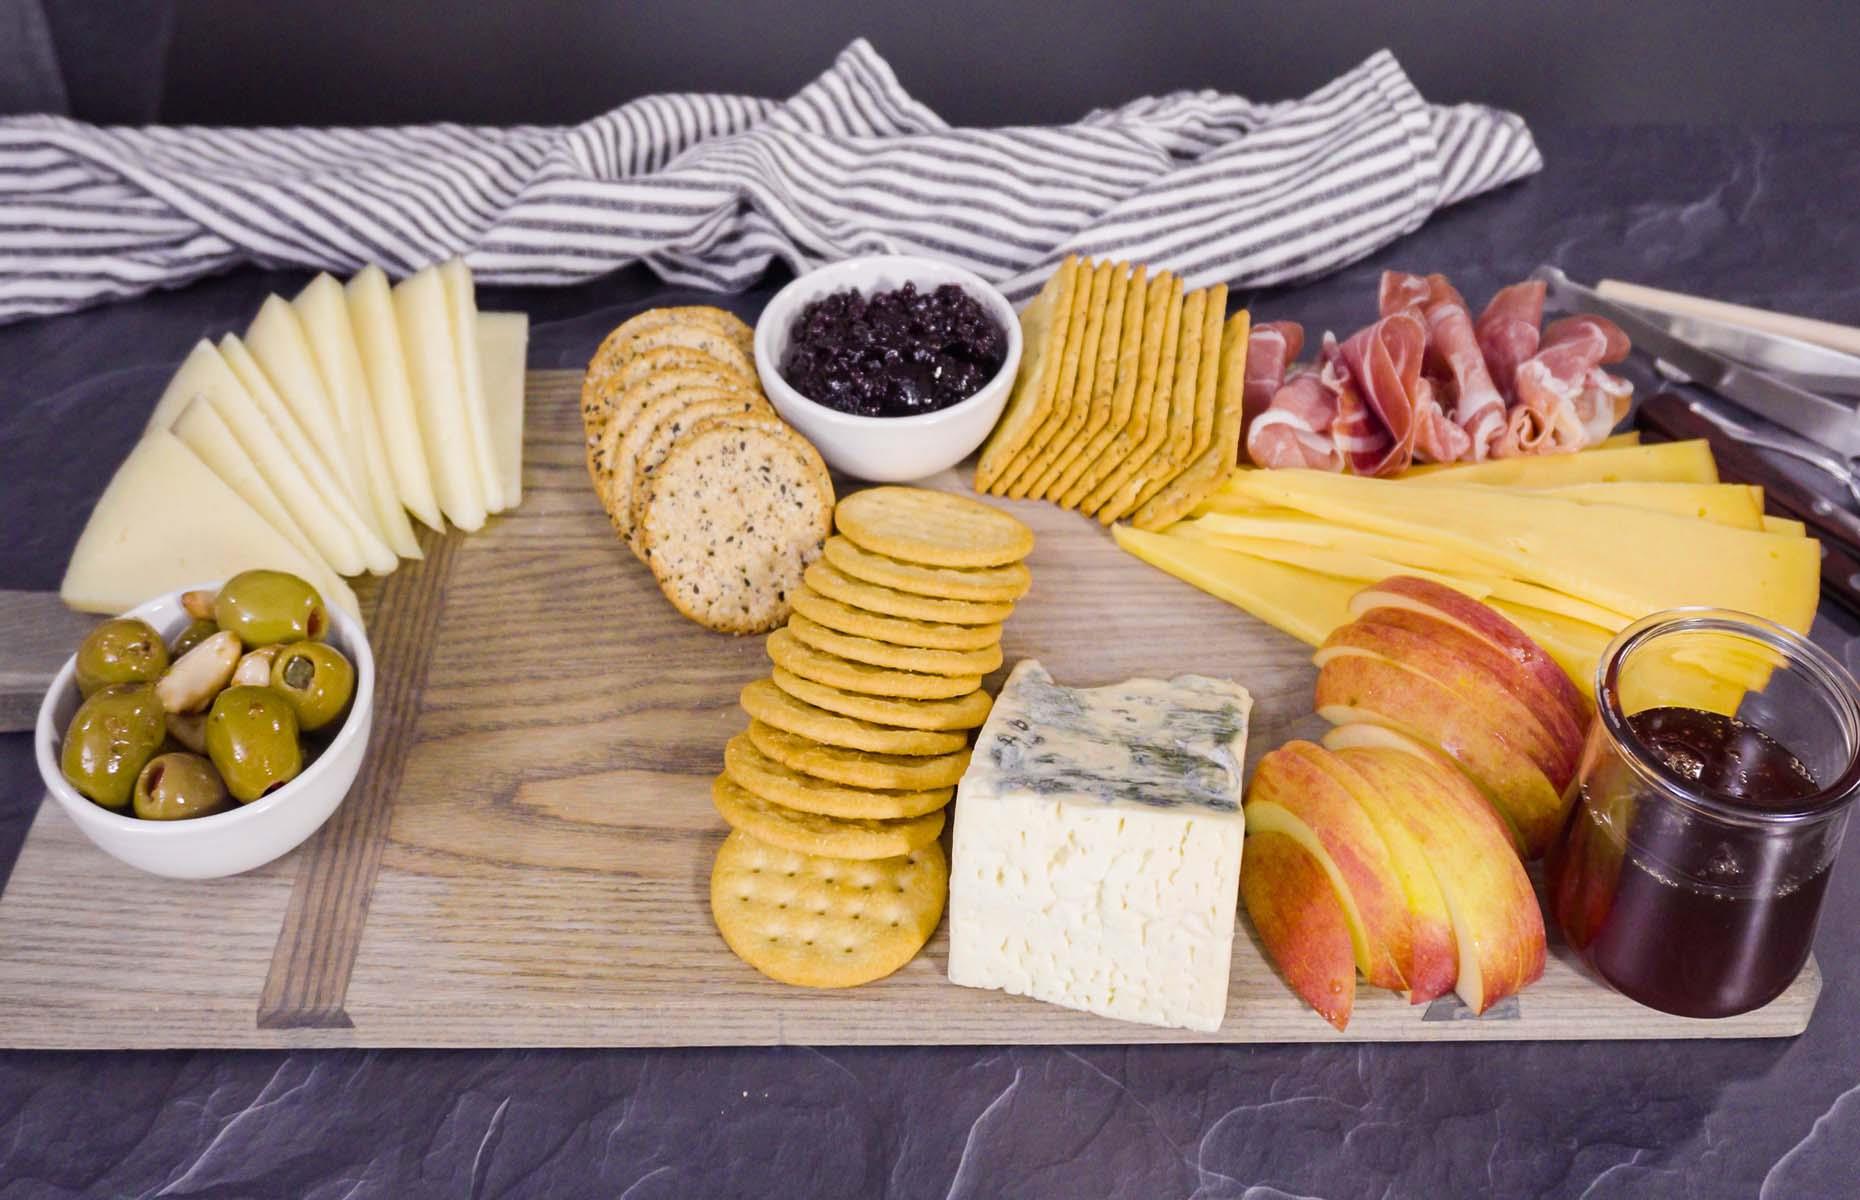 <p>For plenty of wow factor, it's important to fill your board with a variety of flavors, colors, shapes, and textures. If you're creating a cheeseboard, choose cheeses that look, feel, and taste significantly different. Slices of sharp Cheddar are really eye-catching when fanned; pair them with chunks of Parmesan for a crumbly mouthfeel, and a sweet and creamy Stilton to balance it all out. For a really unique platter, go to a cheesemonger and ask for small selections of cheeses to include. Ones flavoured with fruits and spices will work a charm, and you'll be surprised at the range you can find.  </p>